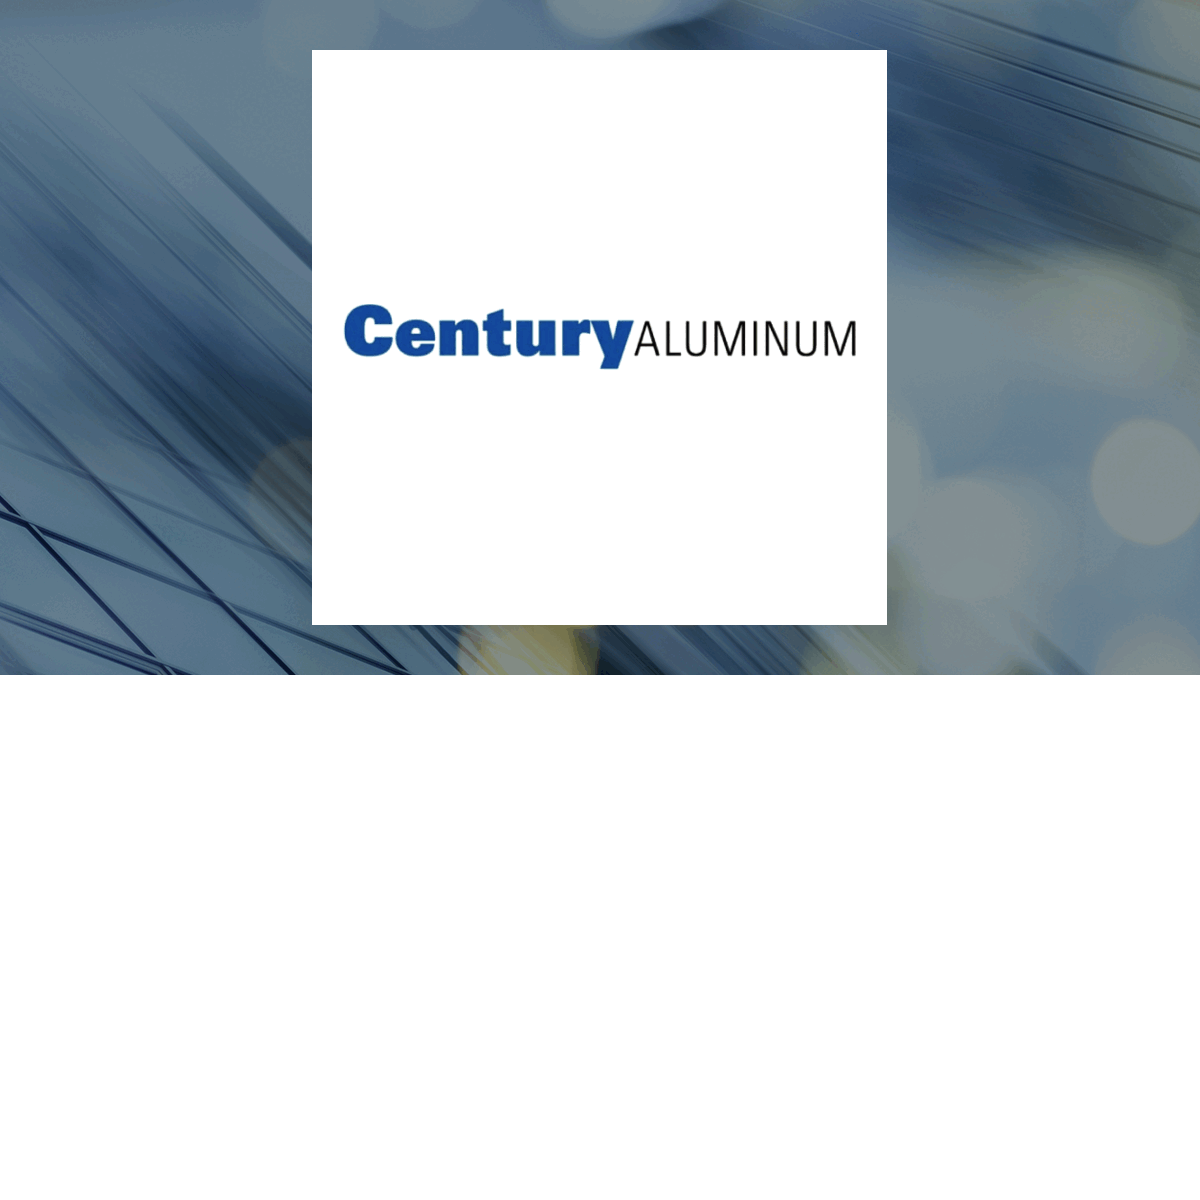 Century Aluminum logo with Industrial Products background